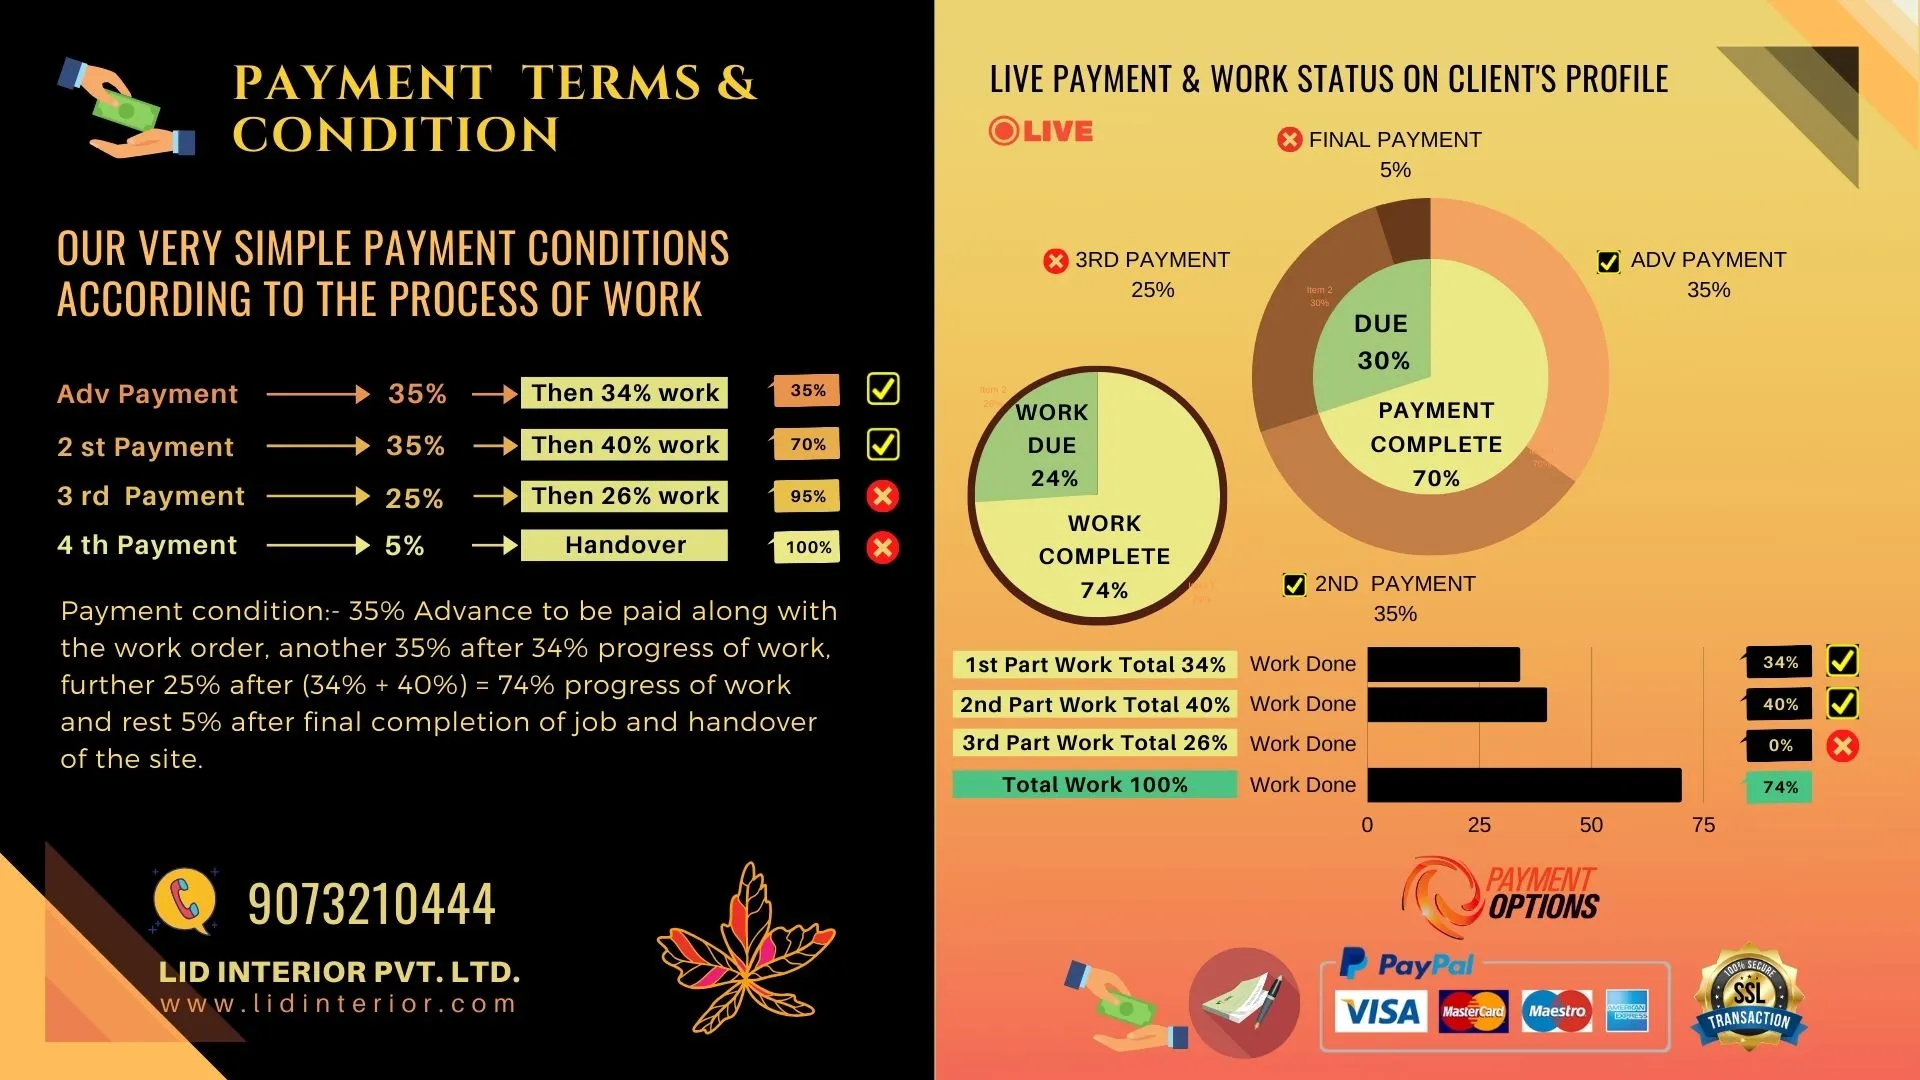 Payment terms & condition of Kolkata’s best interior design company of 2024 - LID Interior Pvt. Ltd.